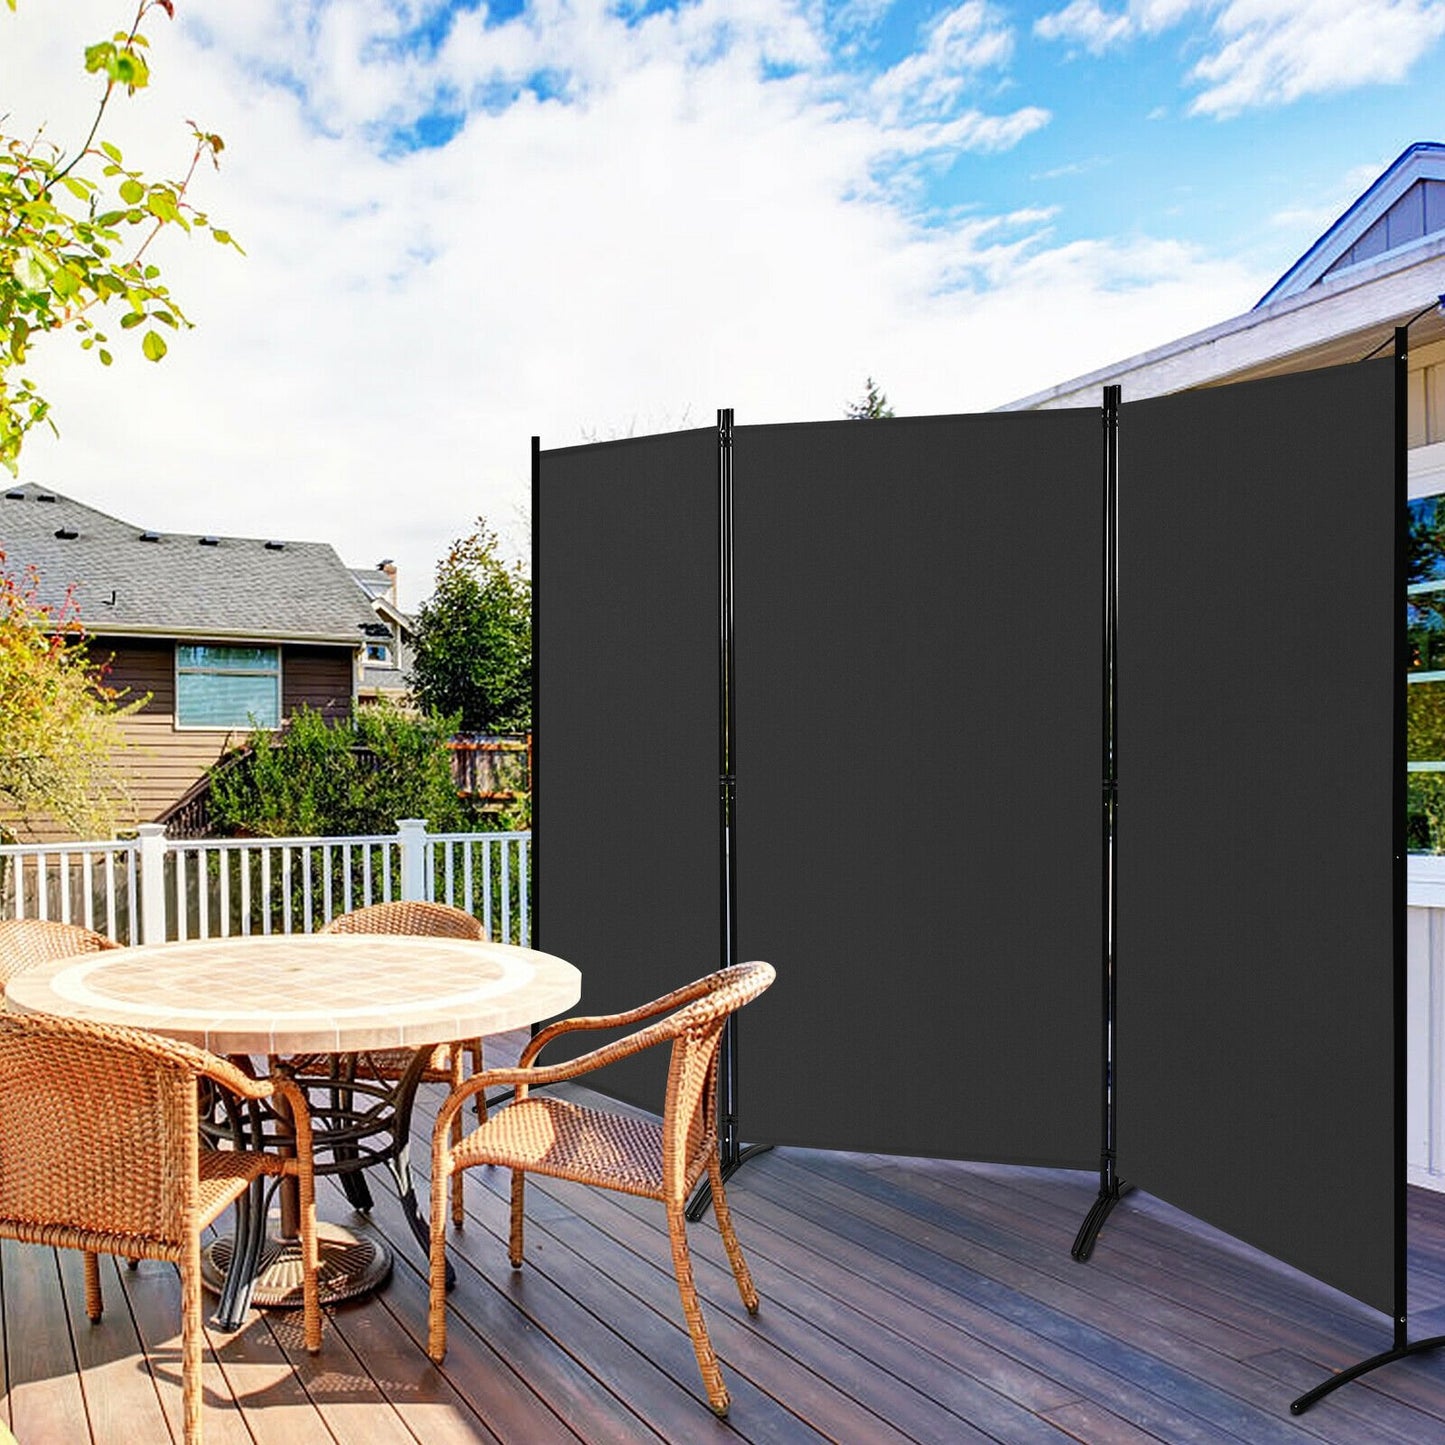 3-Panel Room Divider Folding Privacy Partition Screen for Office Room, Black - Gallery Canada